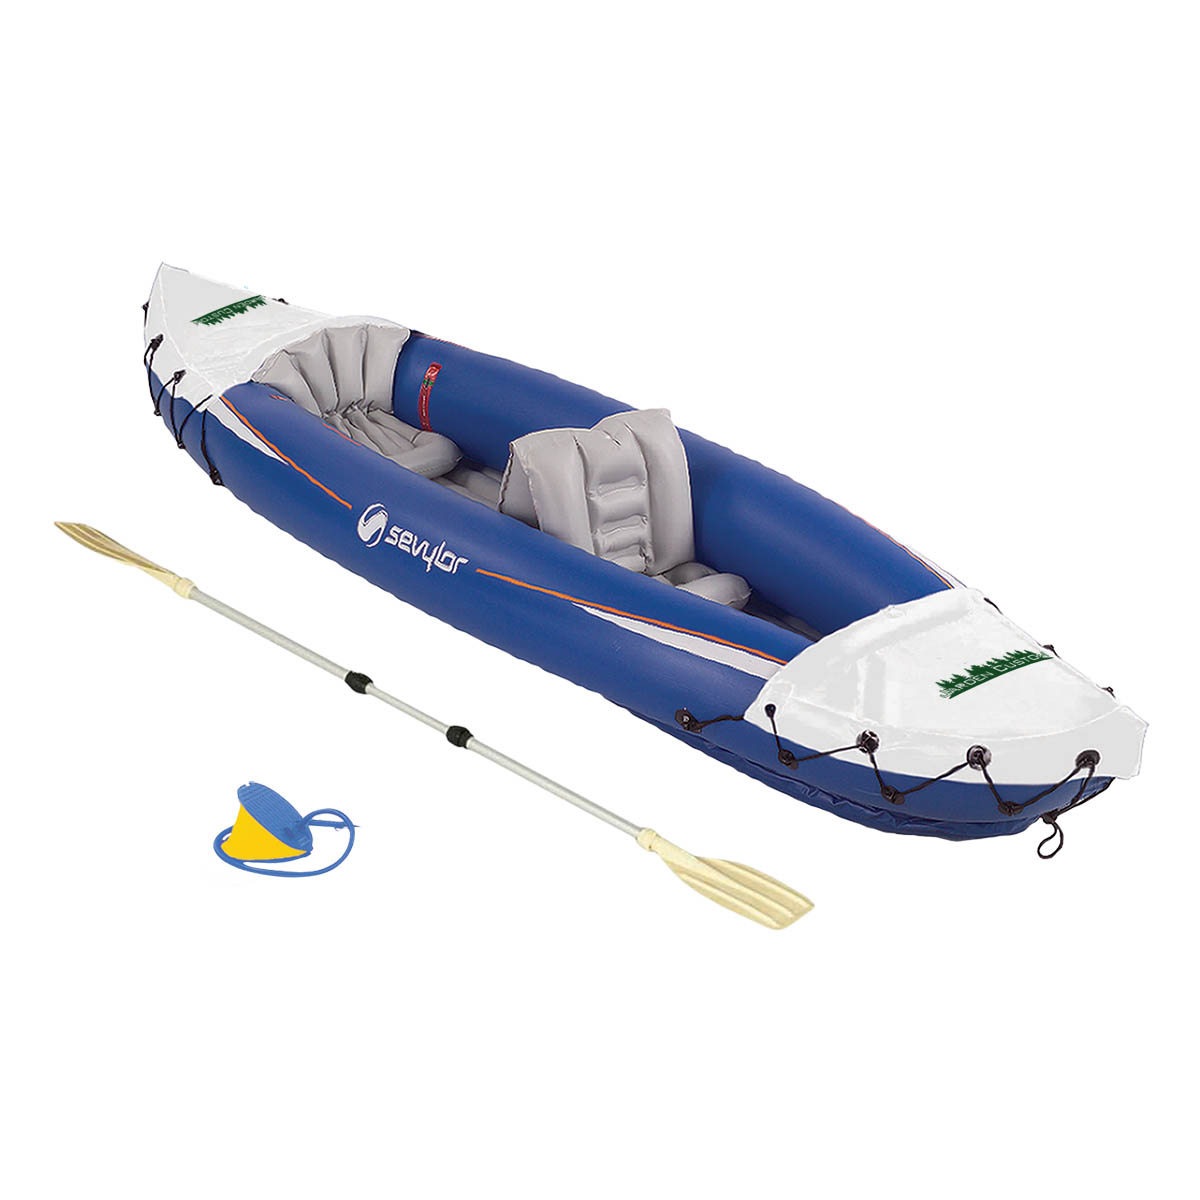 Sevylor SEVYLOR INFLATABLE TWO MAN KAYAK NEW IN BOX WITH PADDLE 